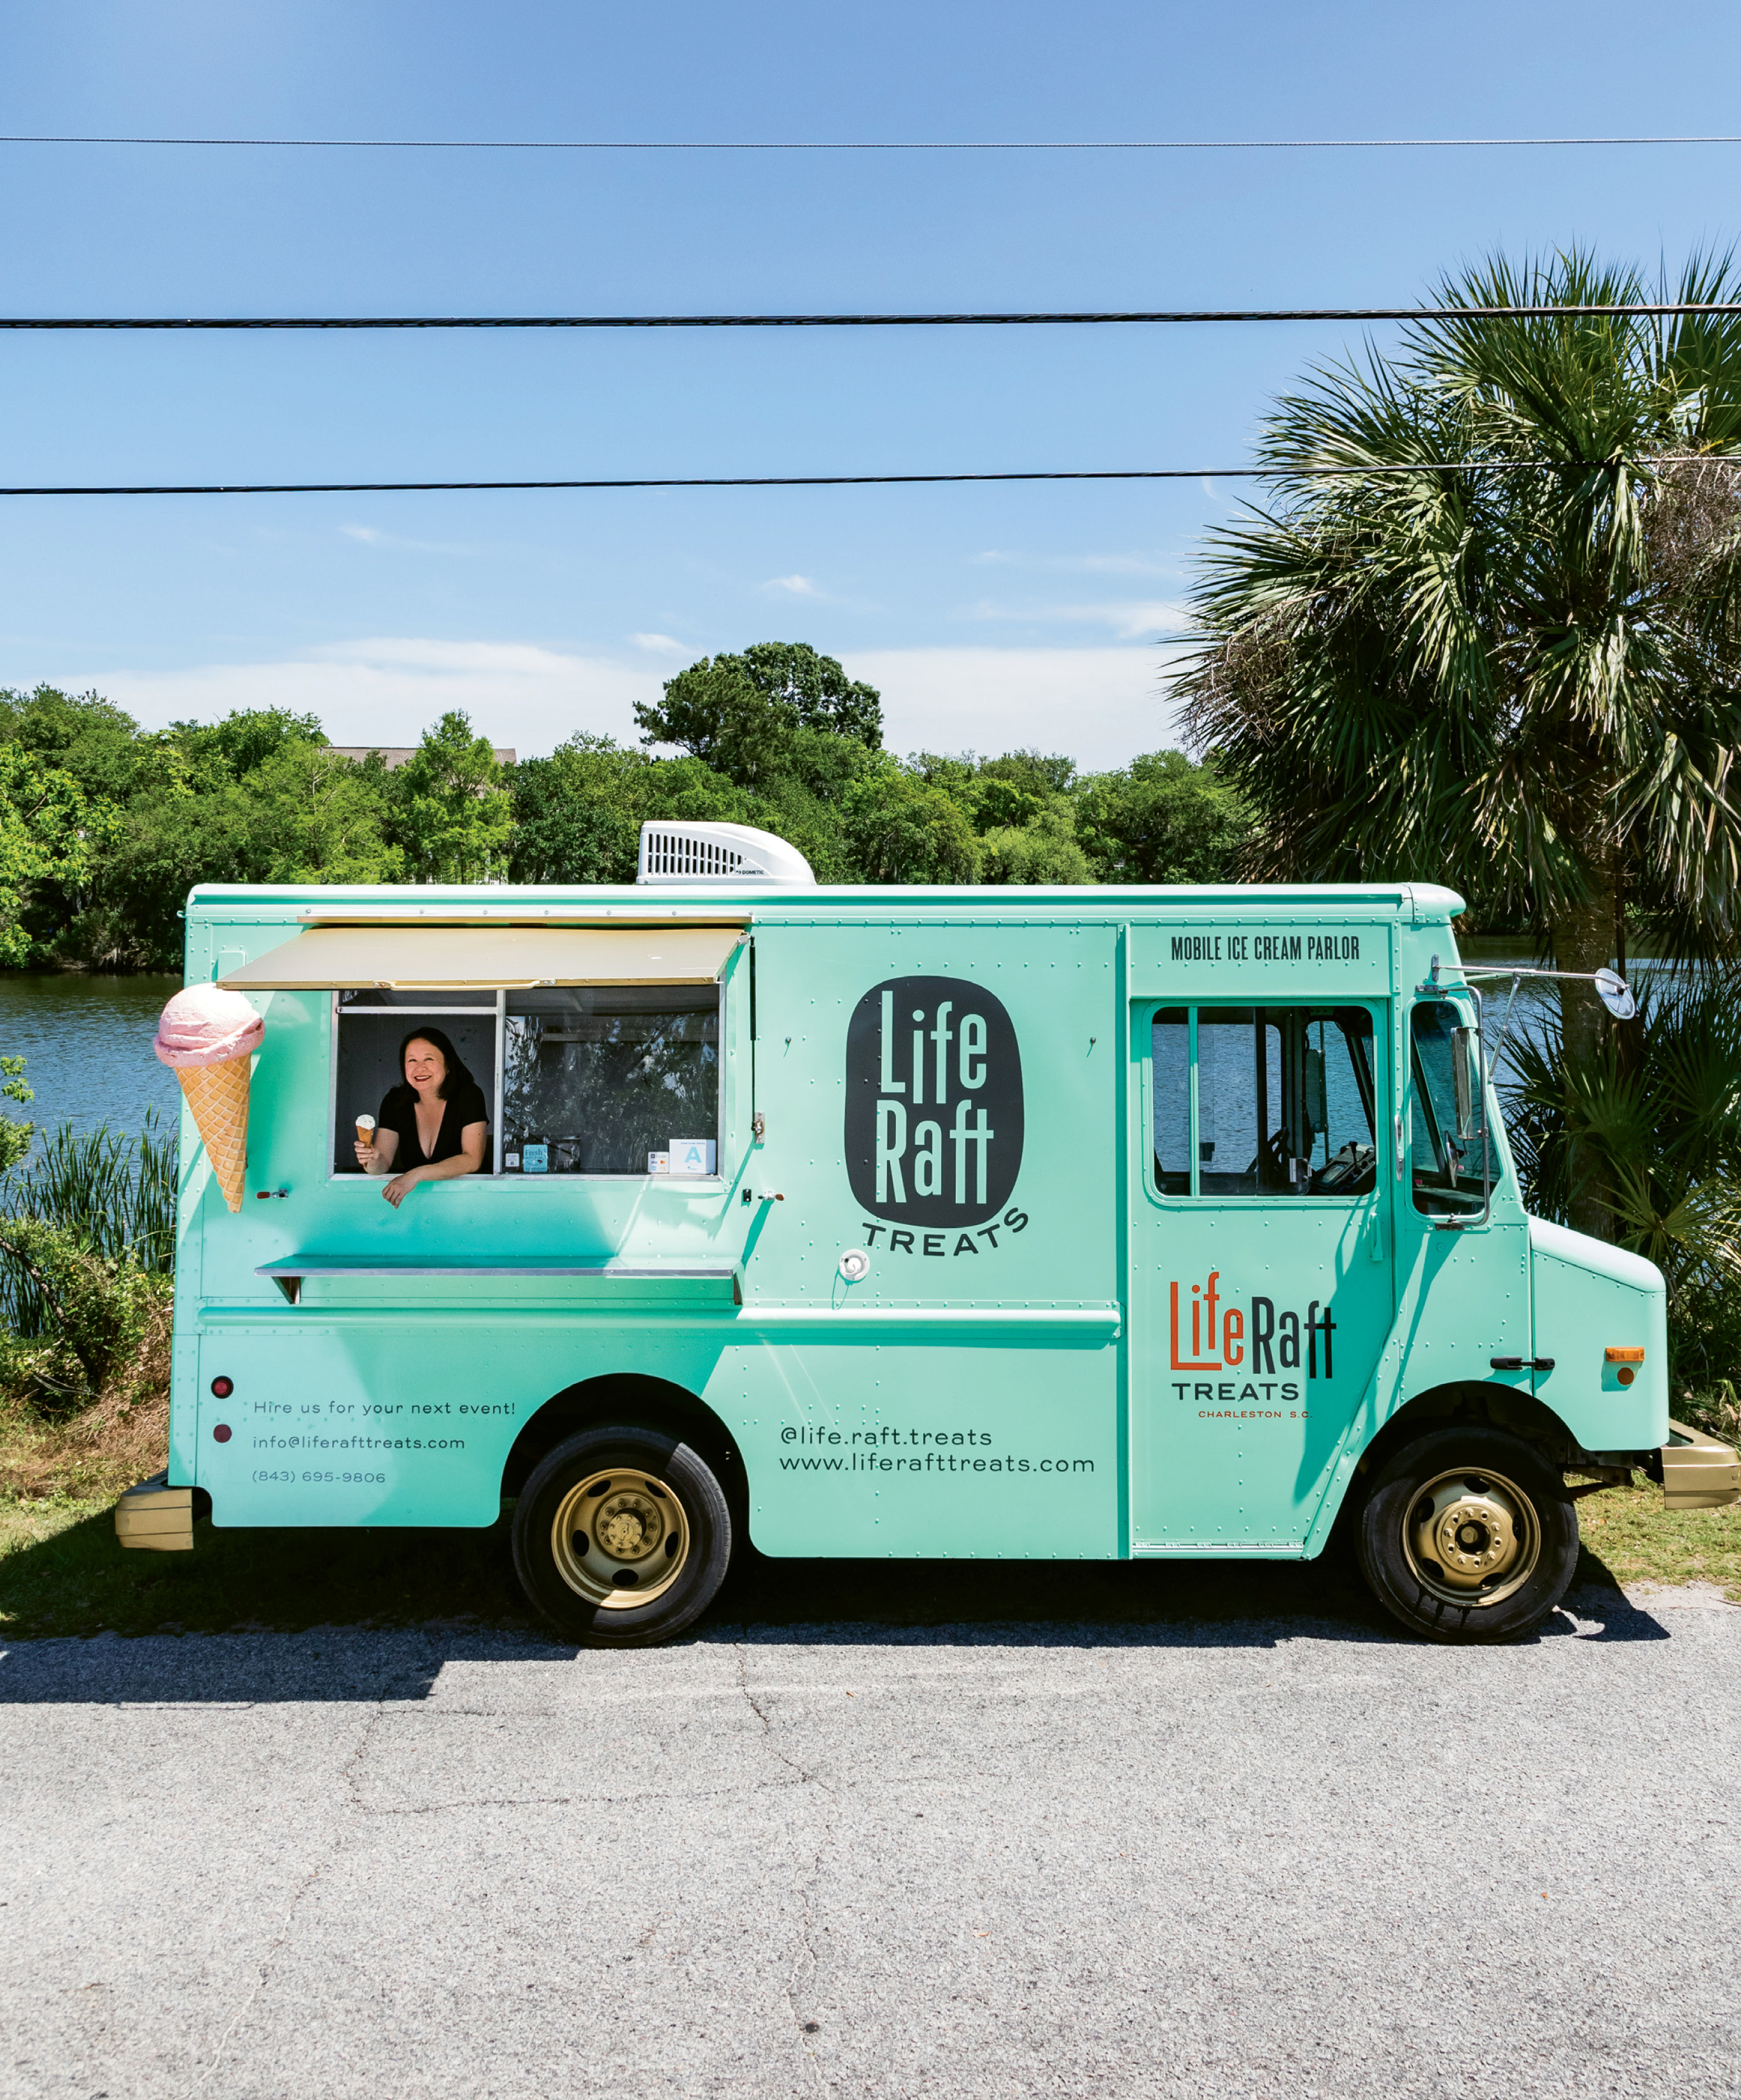 “The truck really sums up my story in food,” says Cynthia Wong of her mobile ice cream parlor. “It’s practically the sixth member of the family—after Critter the dog, of course.”